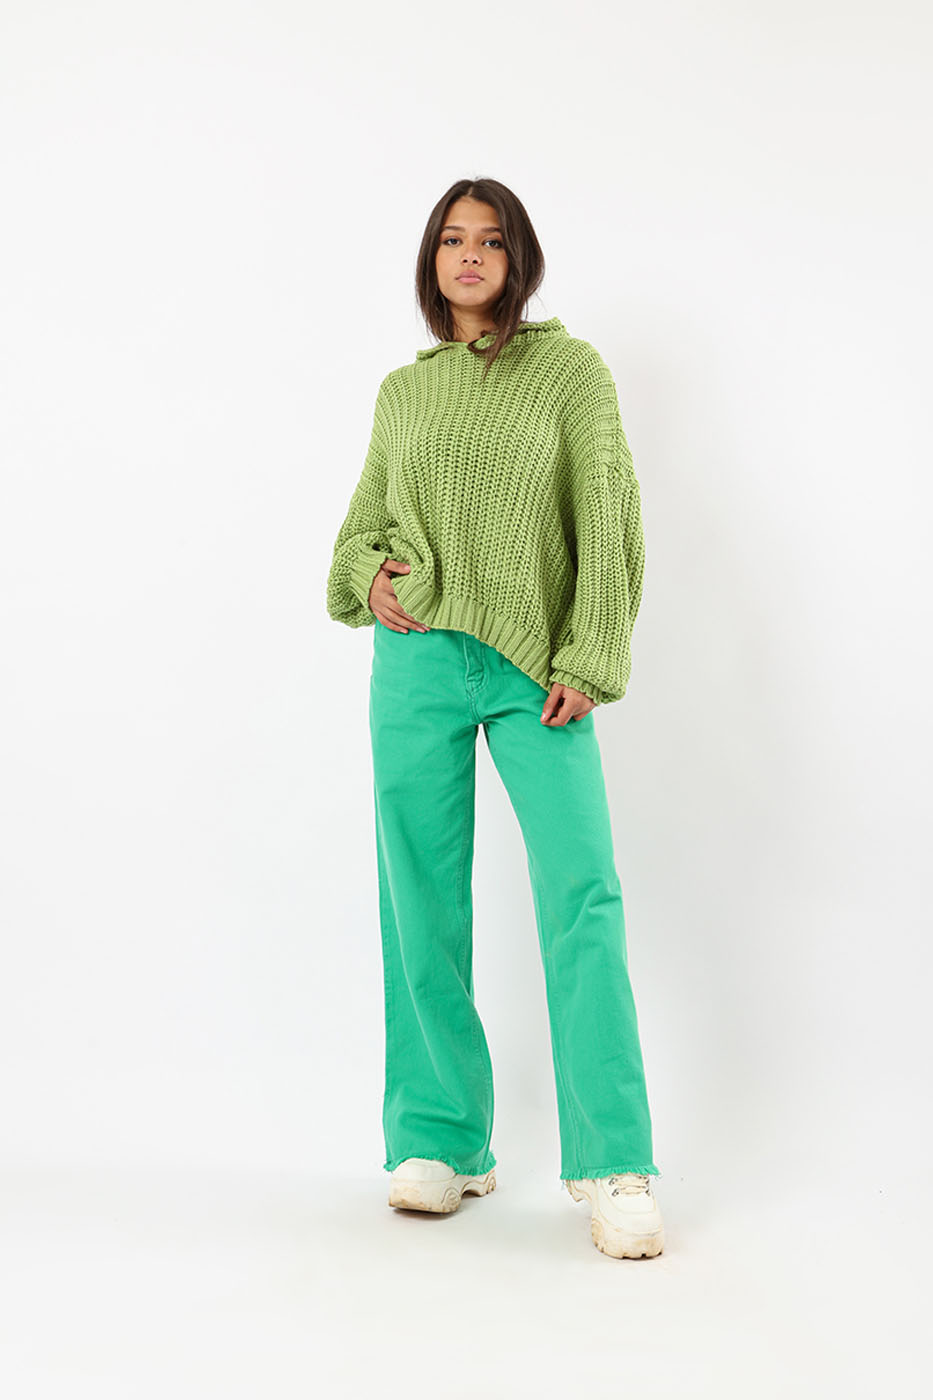 Hooded Sweater In Lime Green – FYI From Dresscode in Egypt